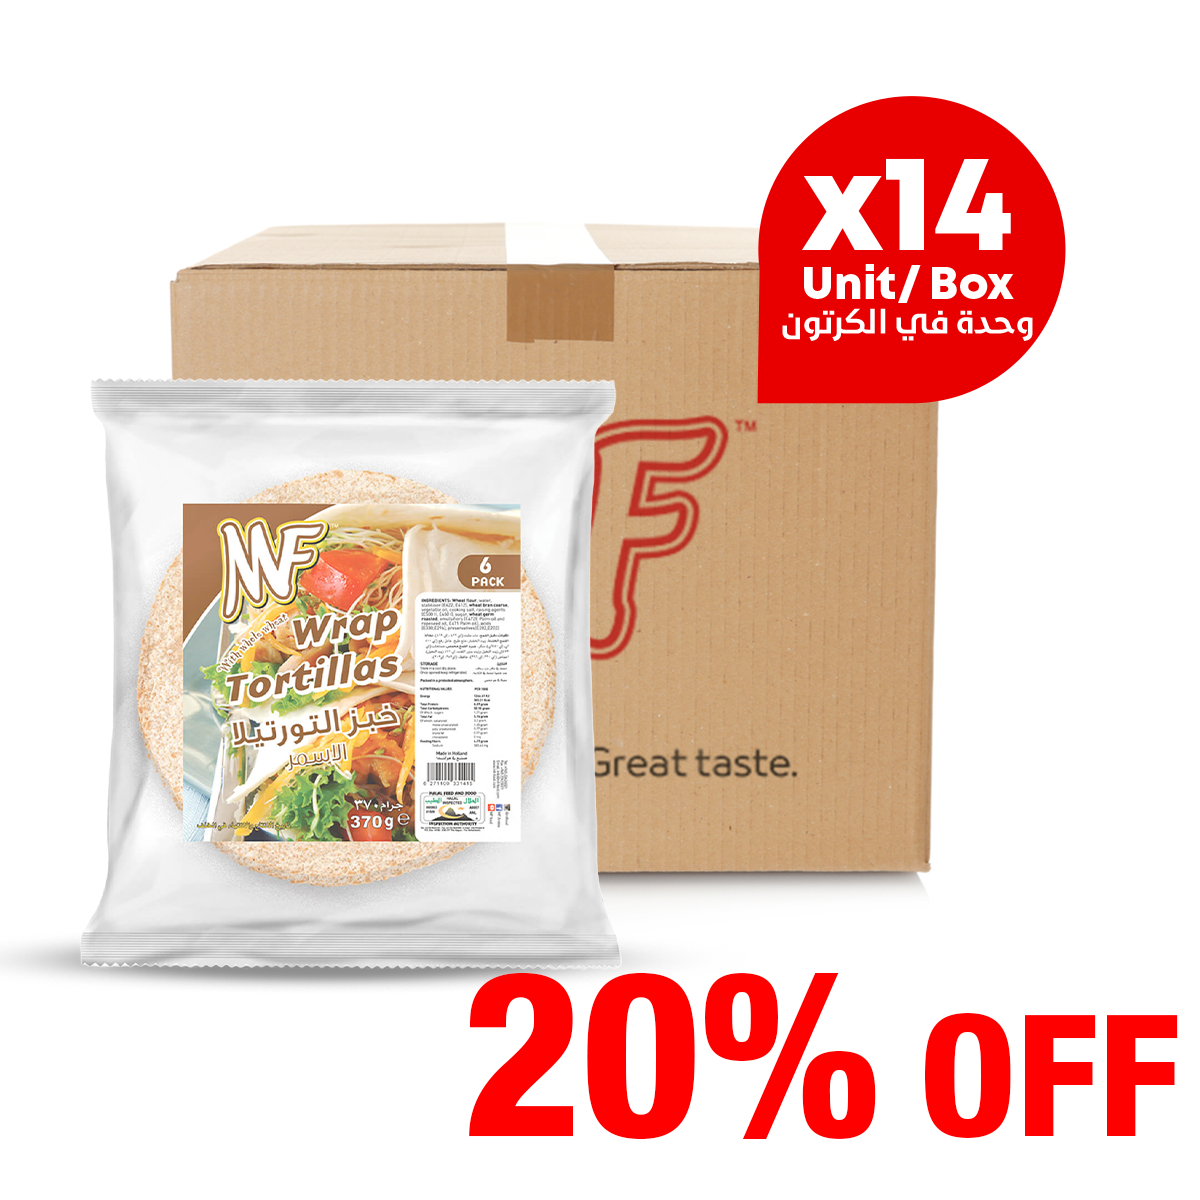 MF Wrap Tortillas With Whole Wheat 14x370g